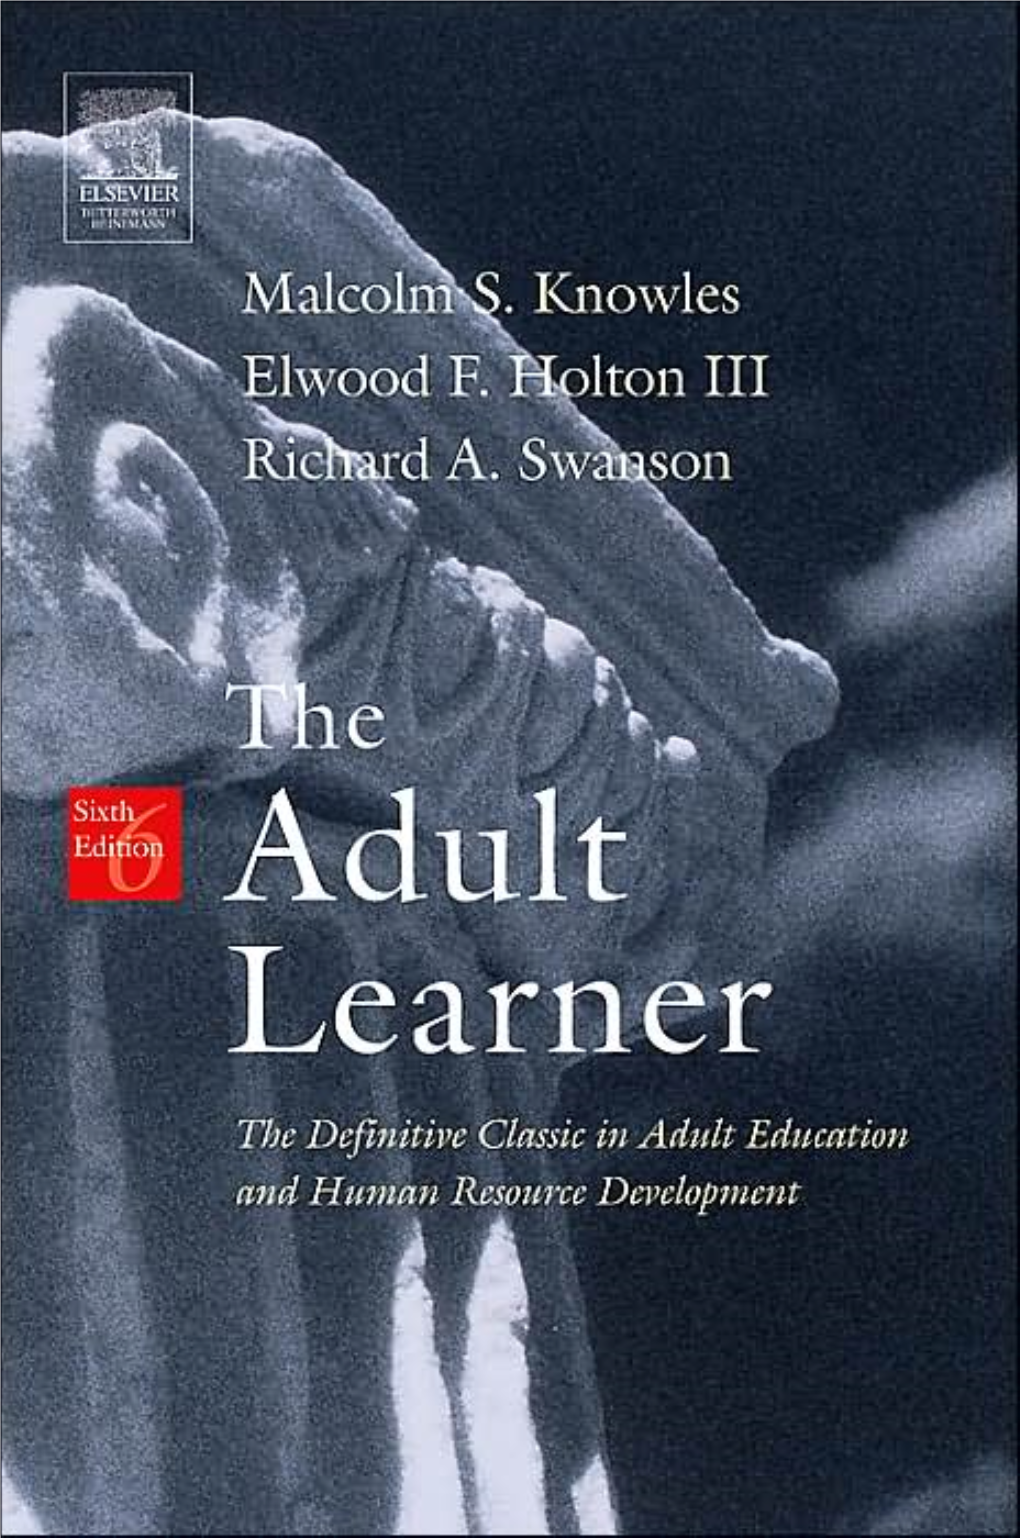 The Adult Learner : the Definitive Classic in Adult Education and Human Resource Development / Malcolm S